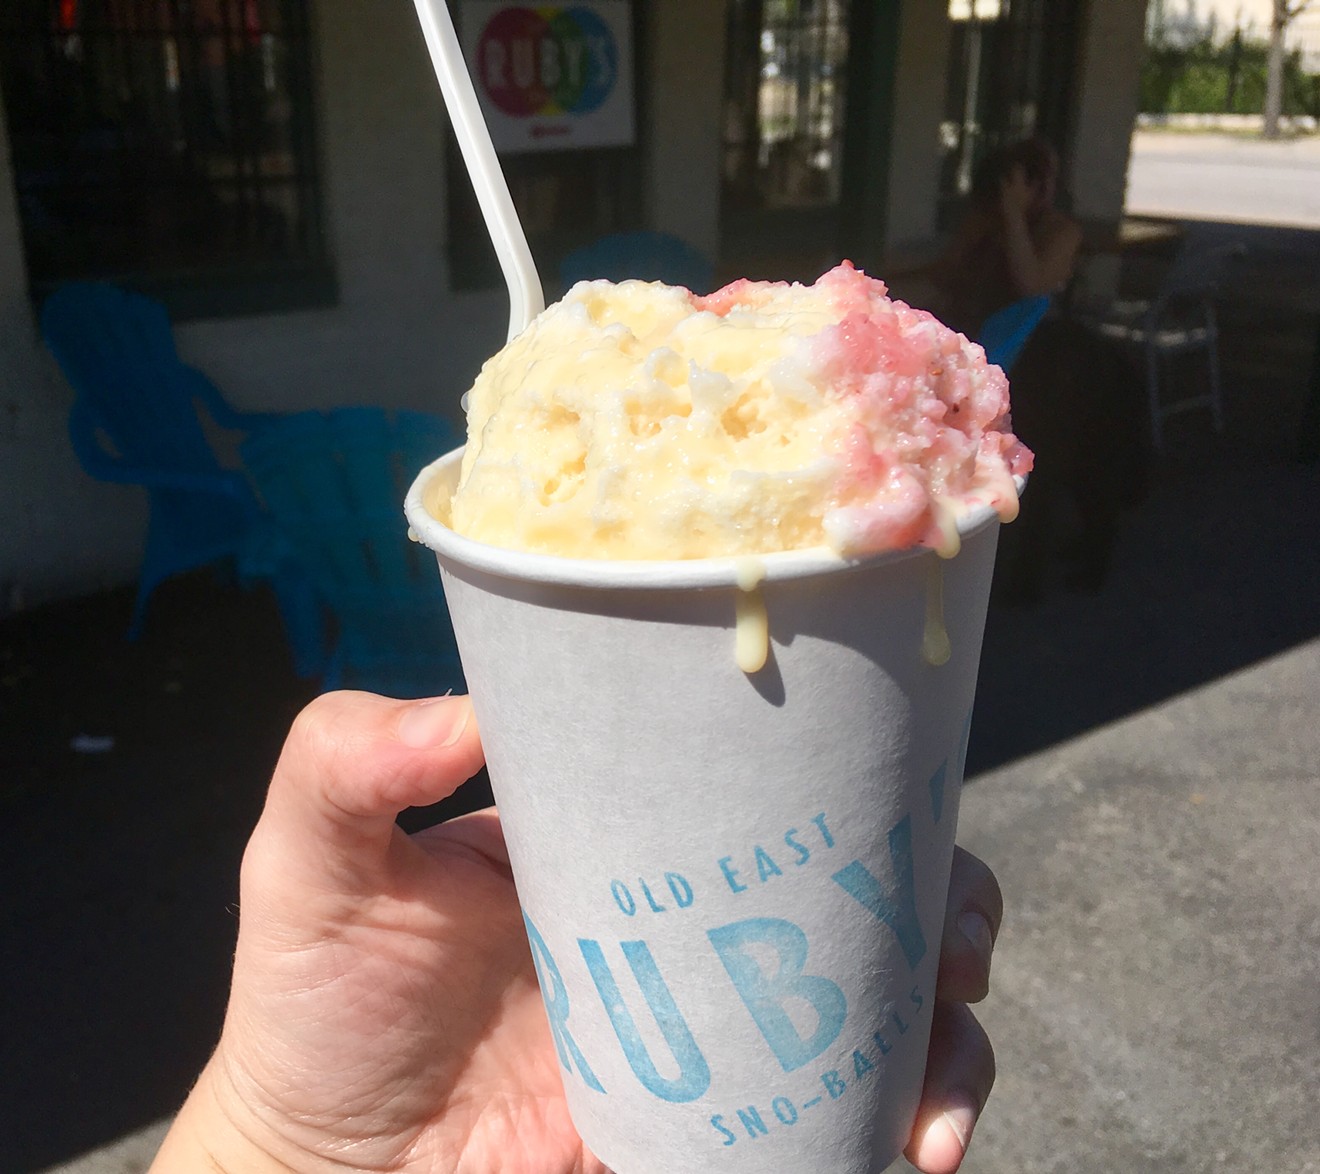 Ruby's sno-balls are made with more natural flavors and ingredients than typical fluorescent-colored, saccharine versions.